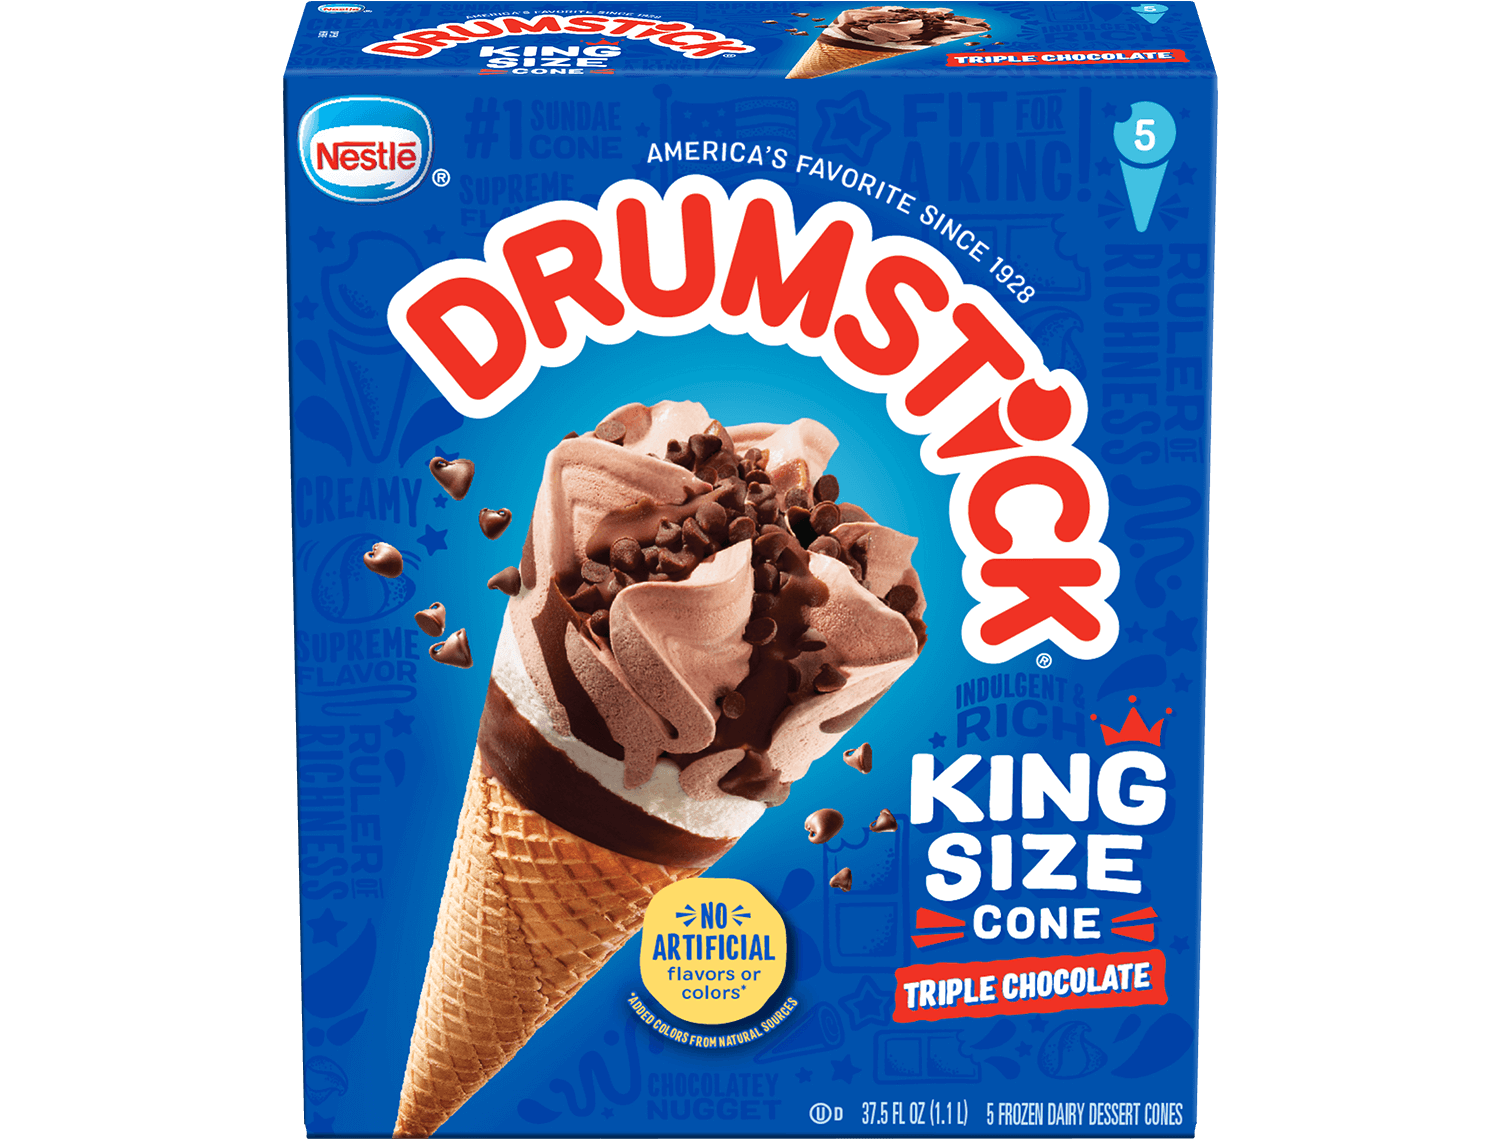 Box of Drumstick 5 King Size Cones Triple Chocolate